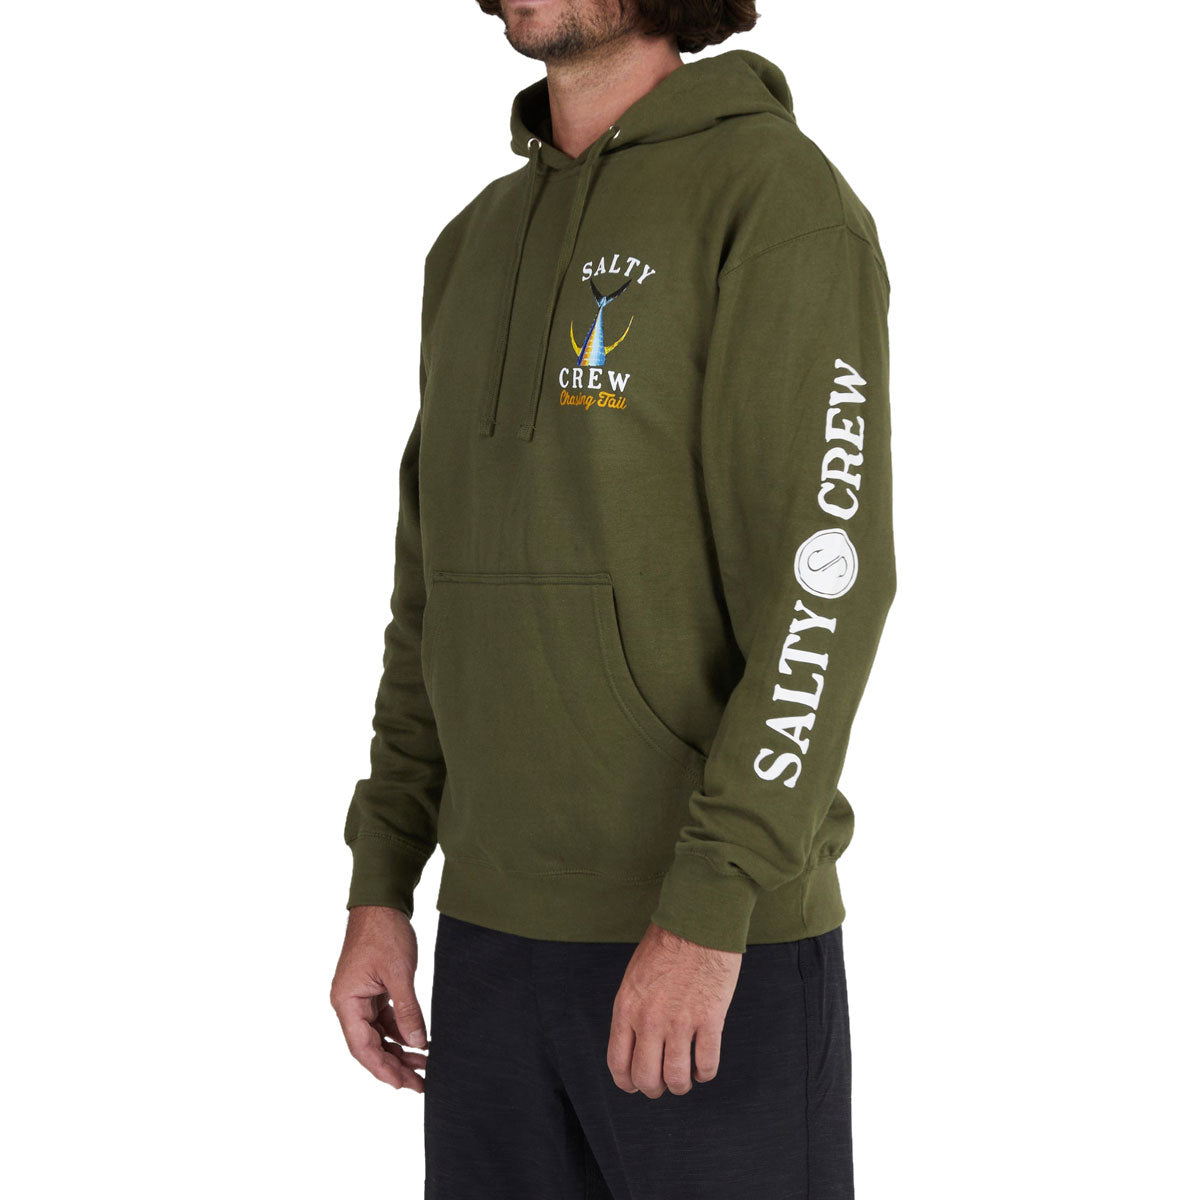 Salty Crew Tailed Hoodie - Army image 3